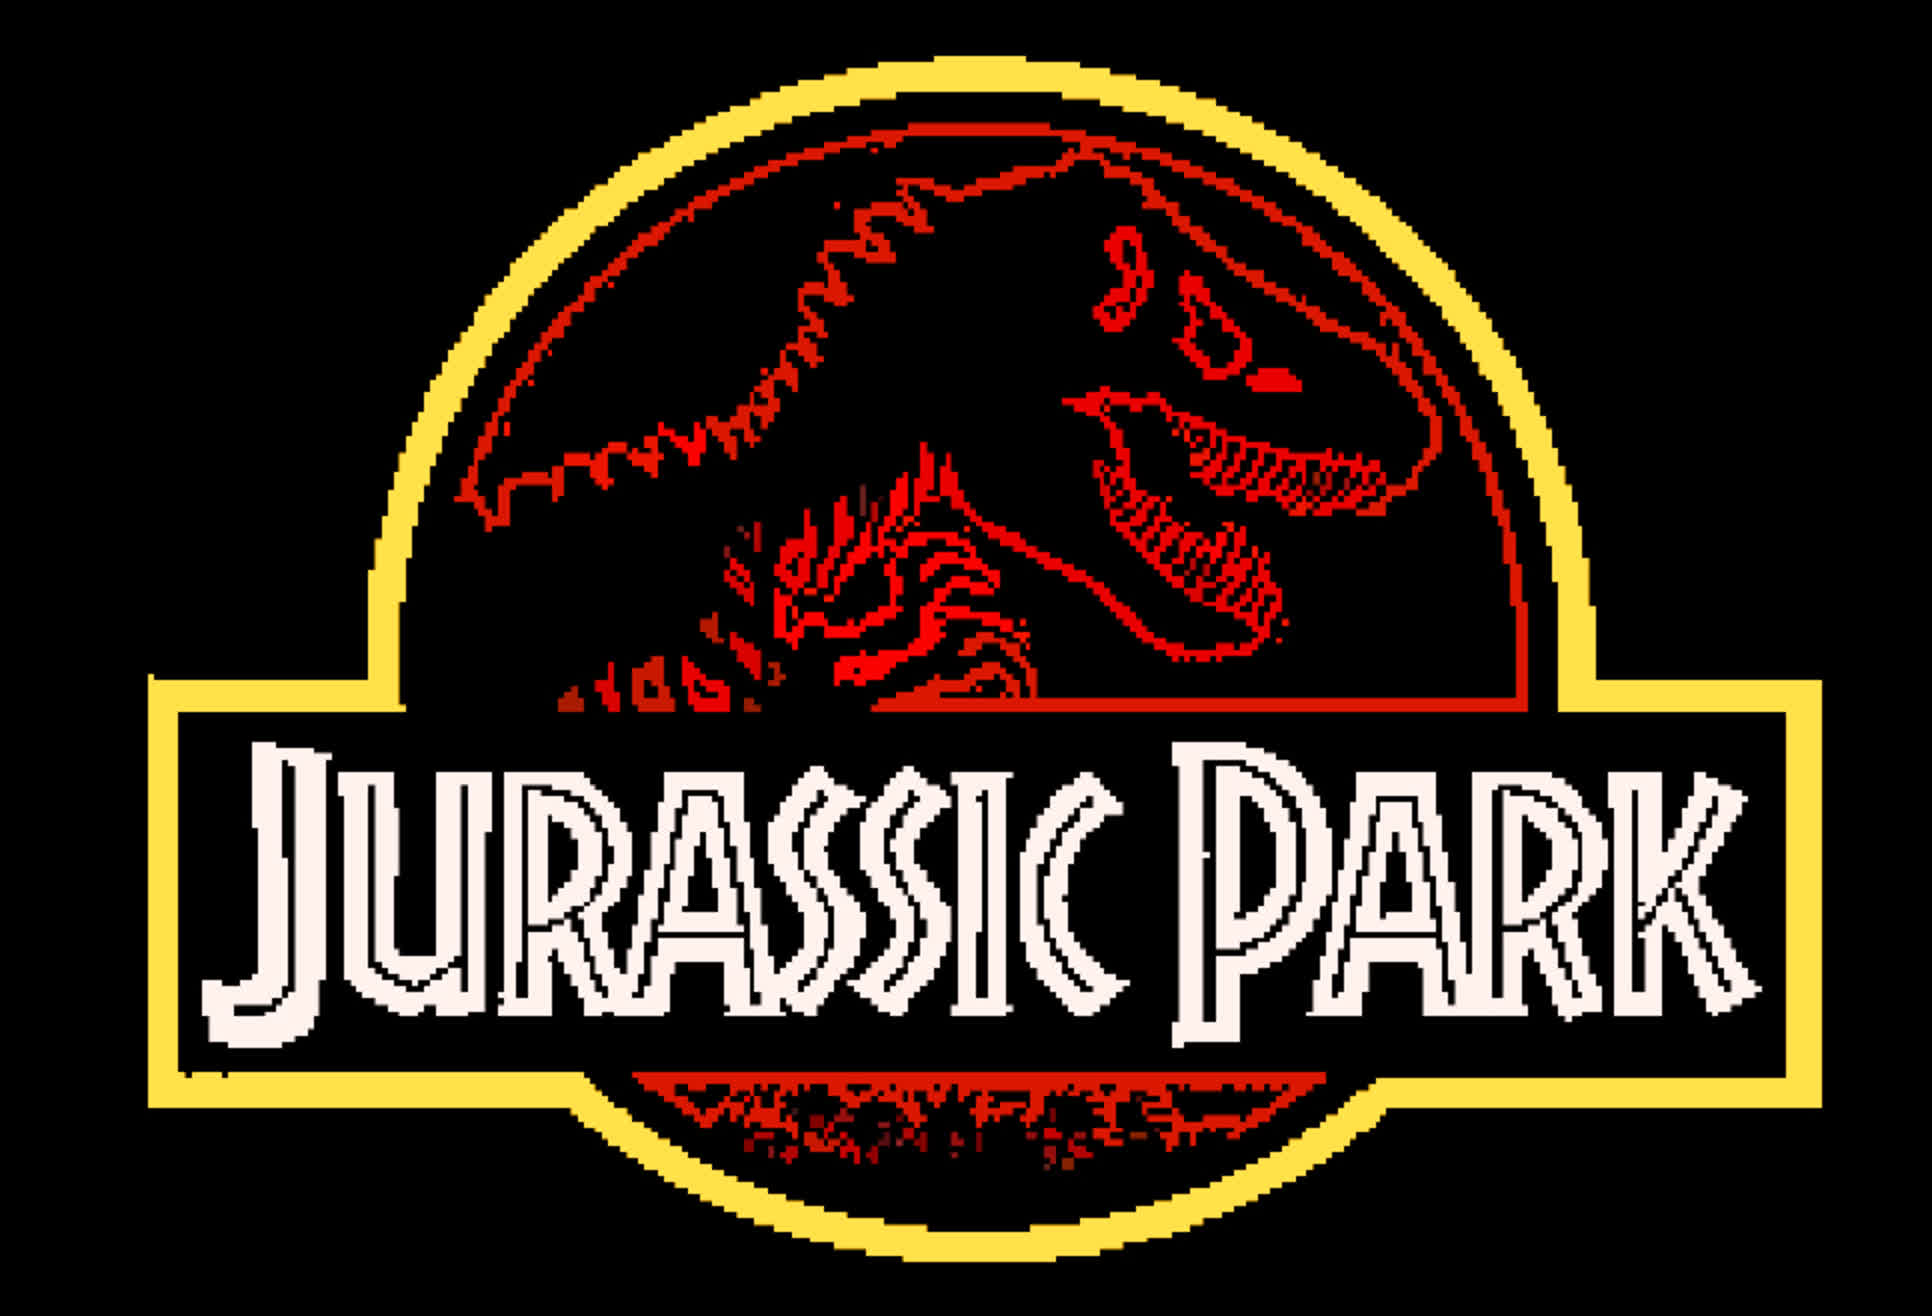 Limited Run Games teases 30th anniversary Jurassic Park retro collection